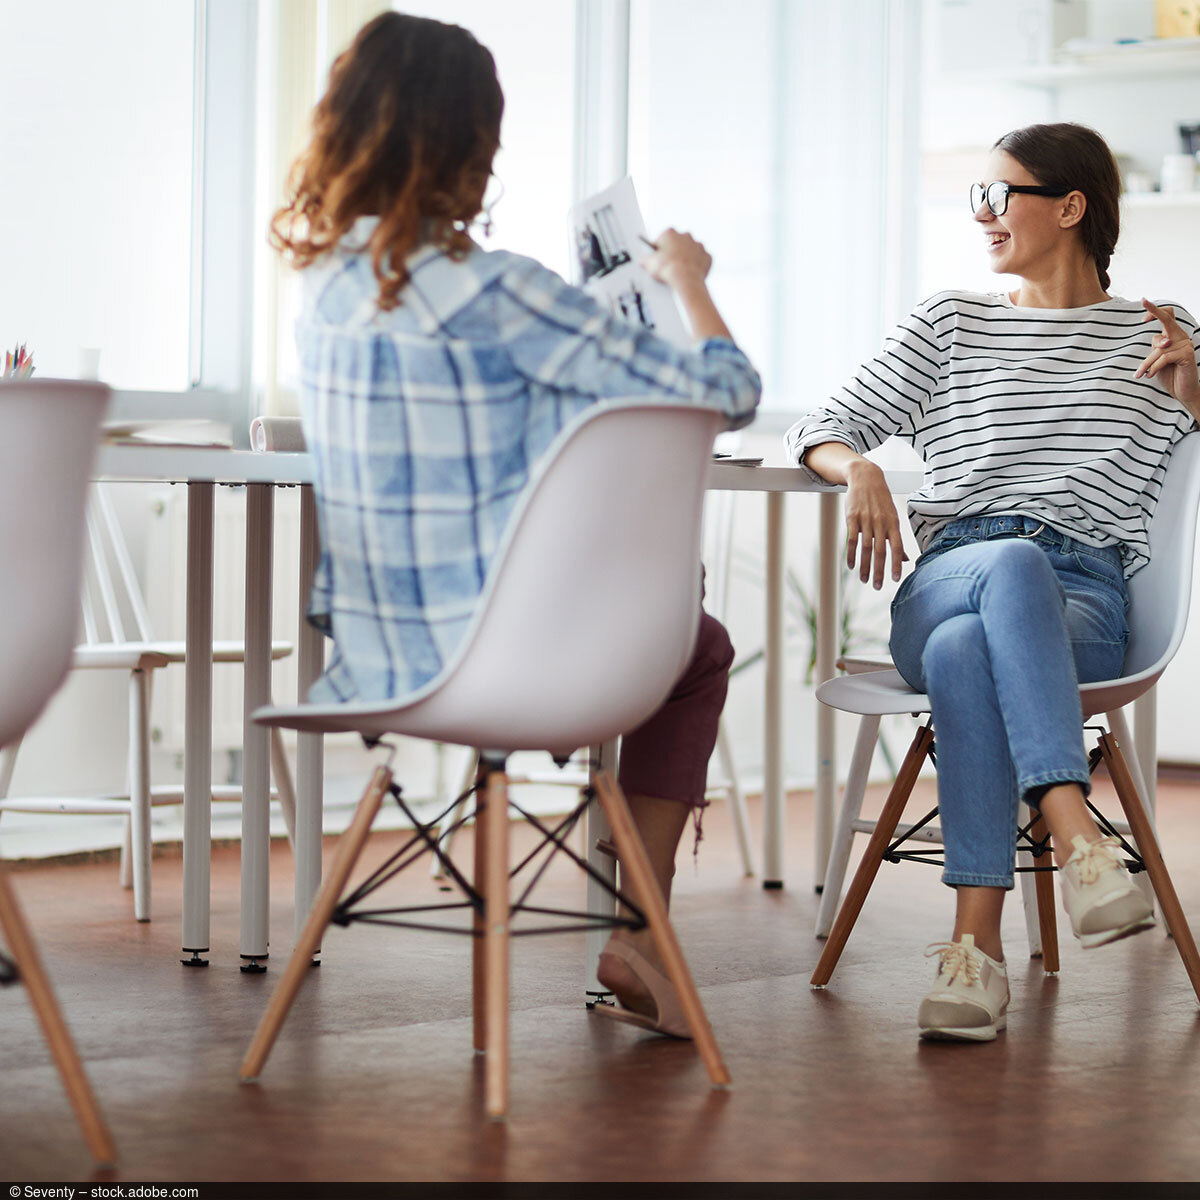 Two women at work in an agency with design furniture in a relaxed sitting posture